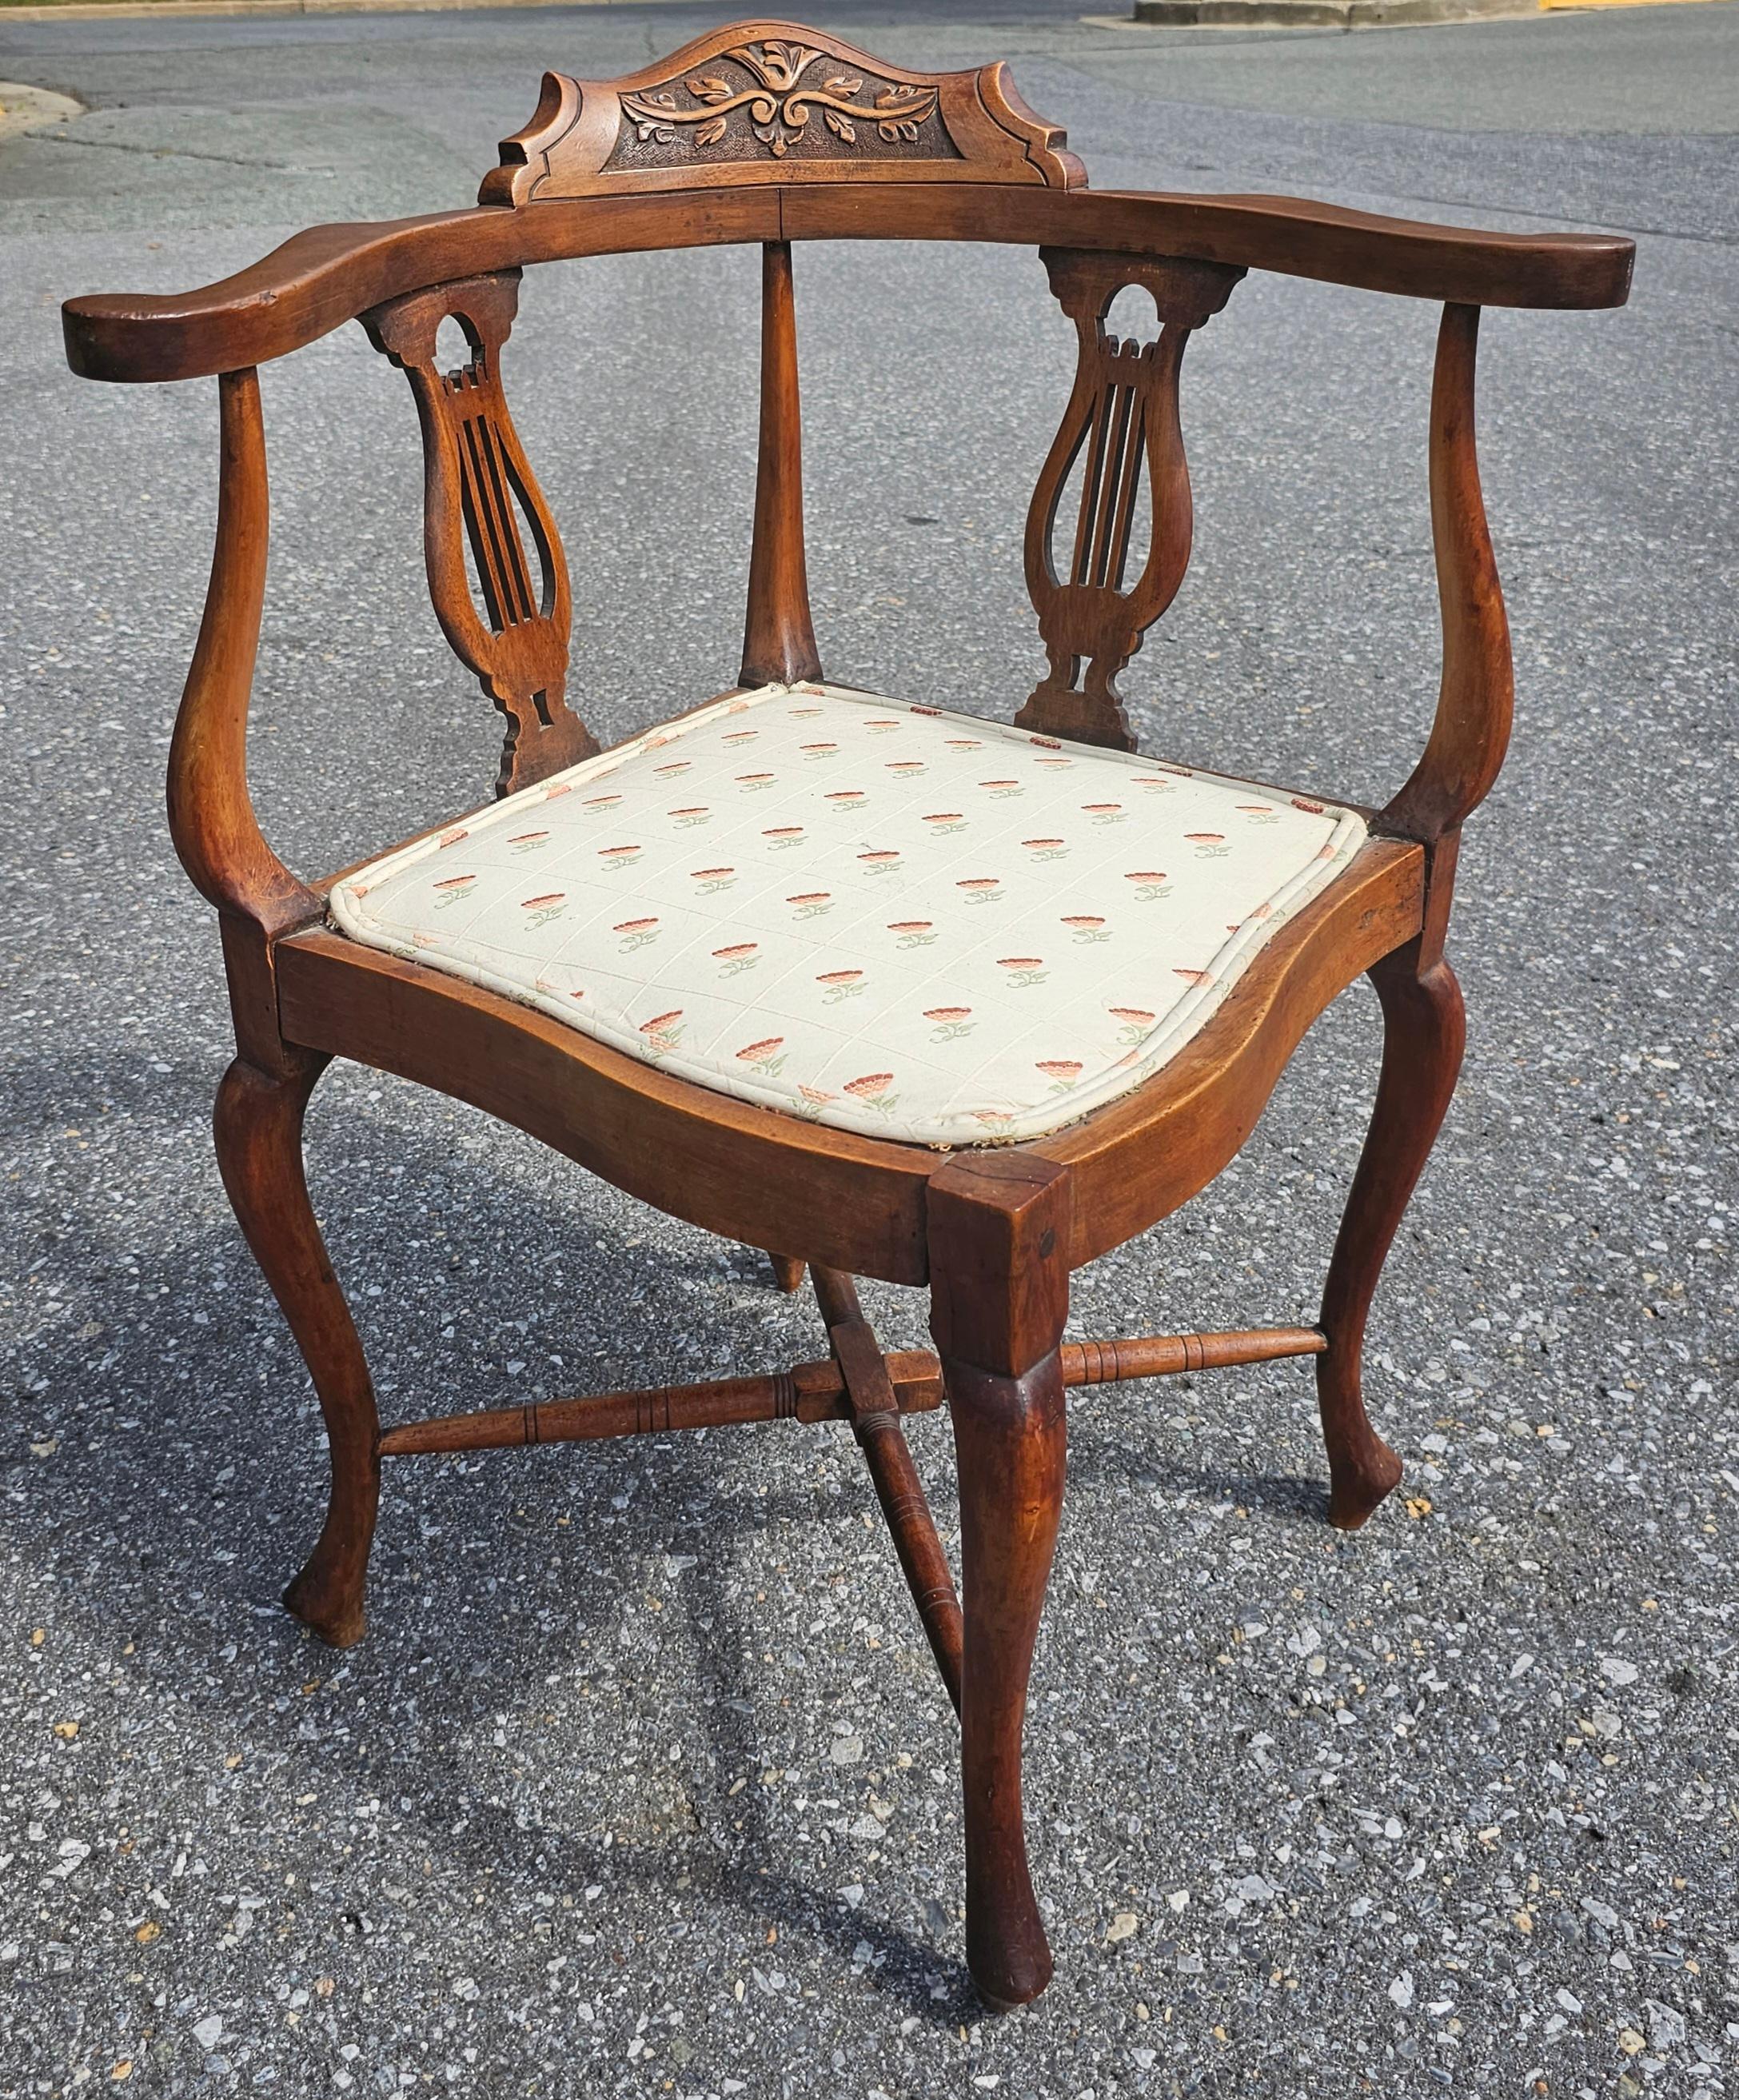 Victorian Carved Walnut Upholstered Seat Corner Chair. Good antique condition. Measures  24.5